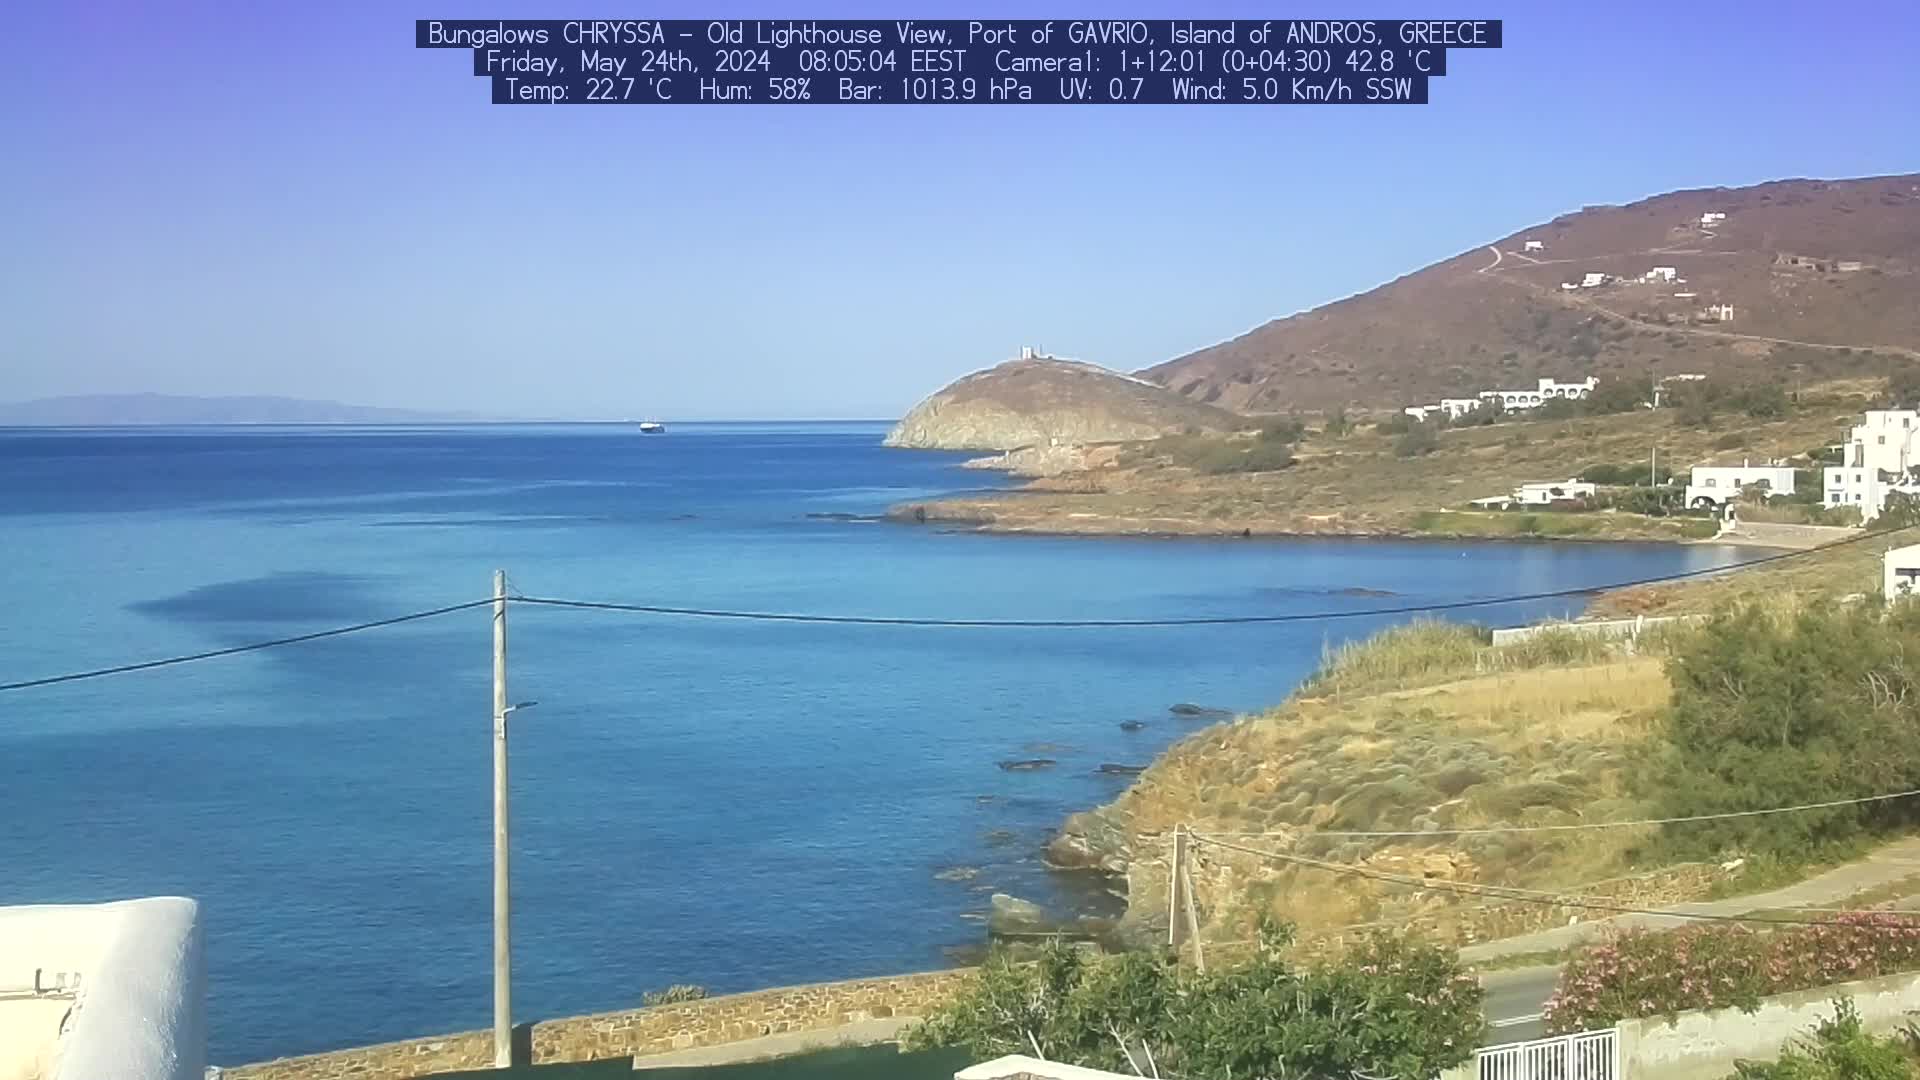 Gavrio (Andros) Wed. 08:05